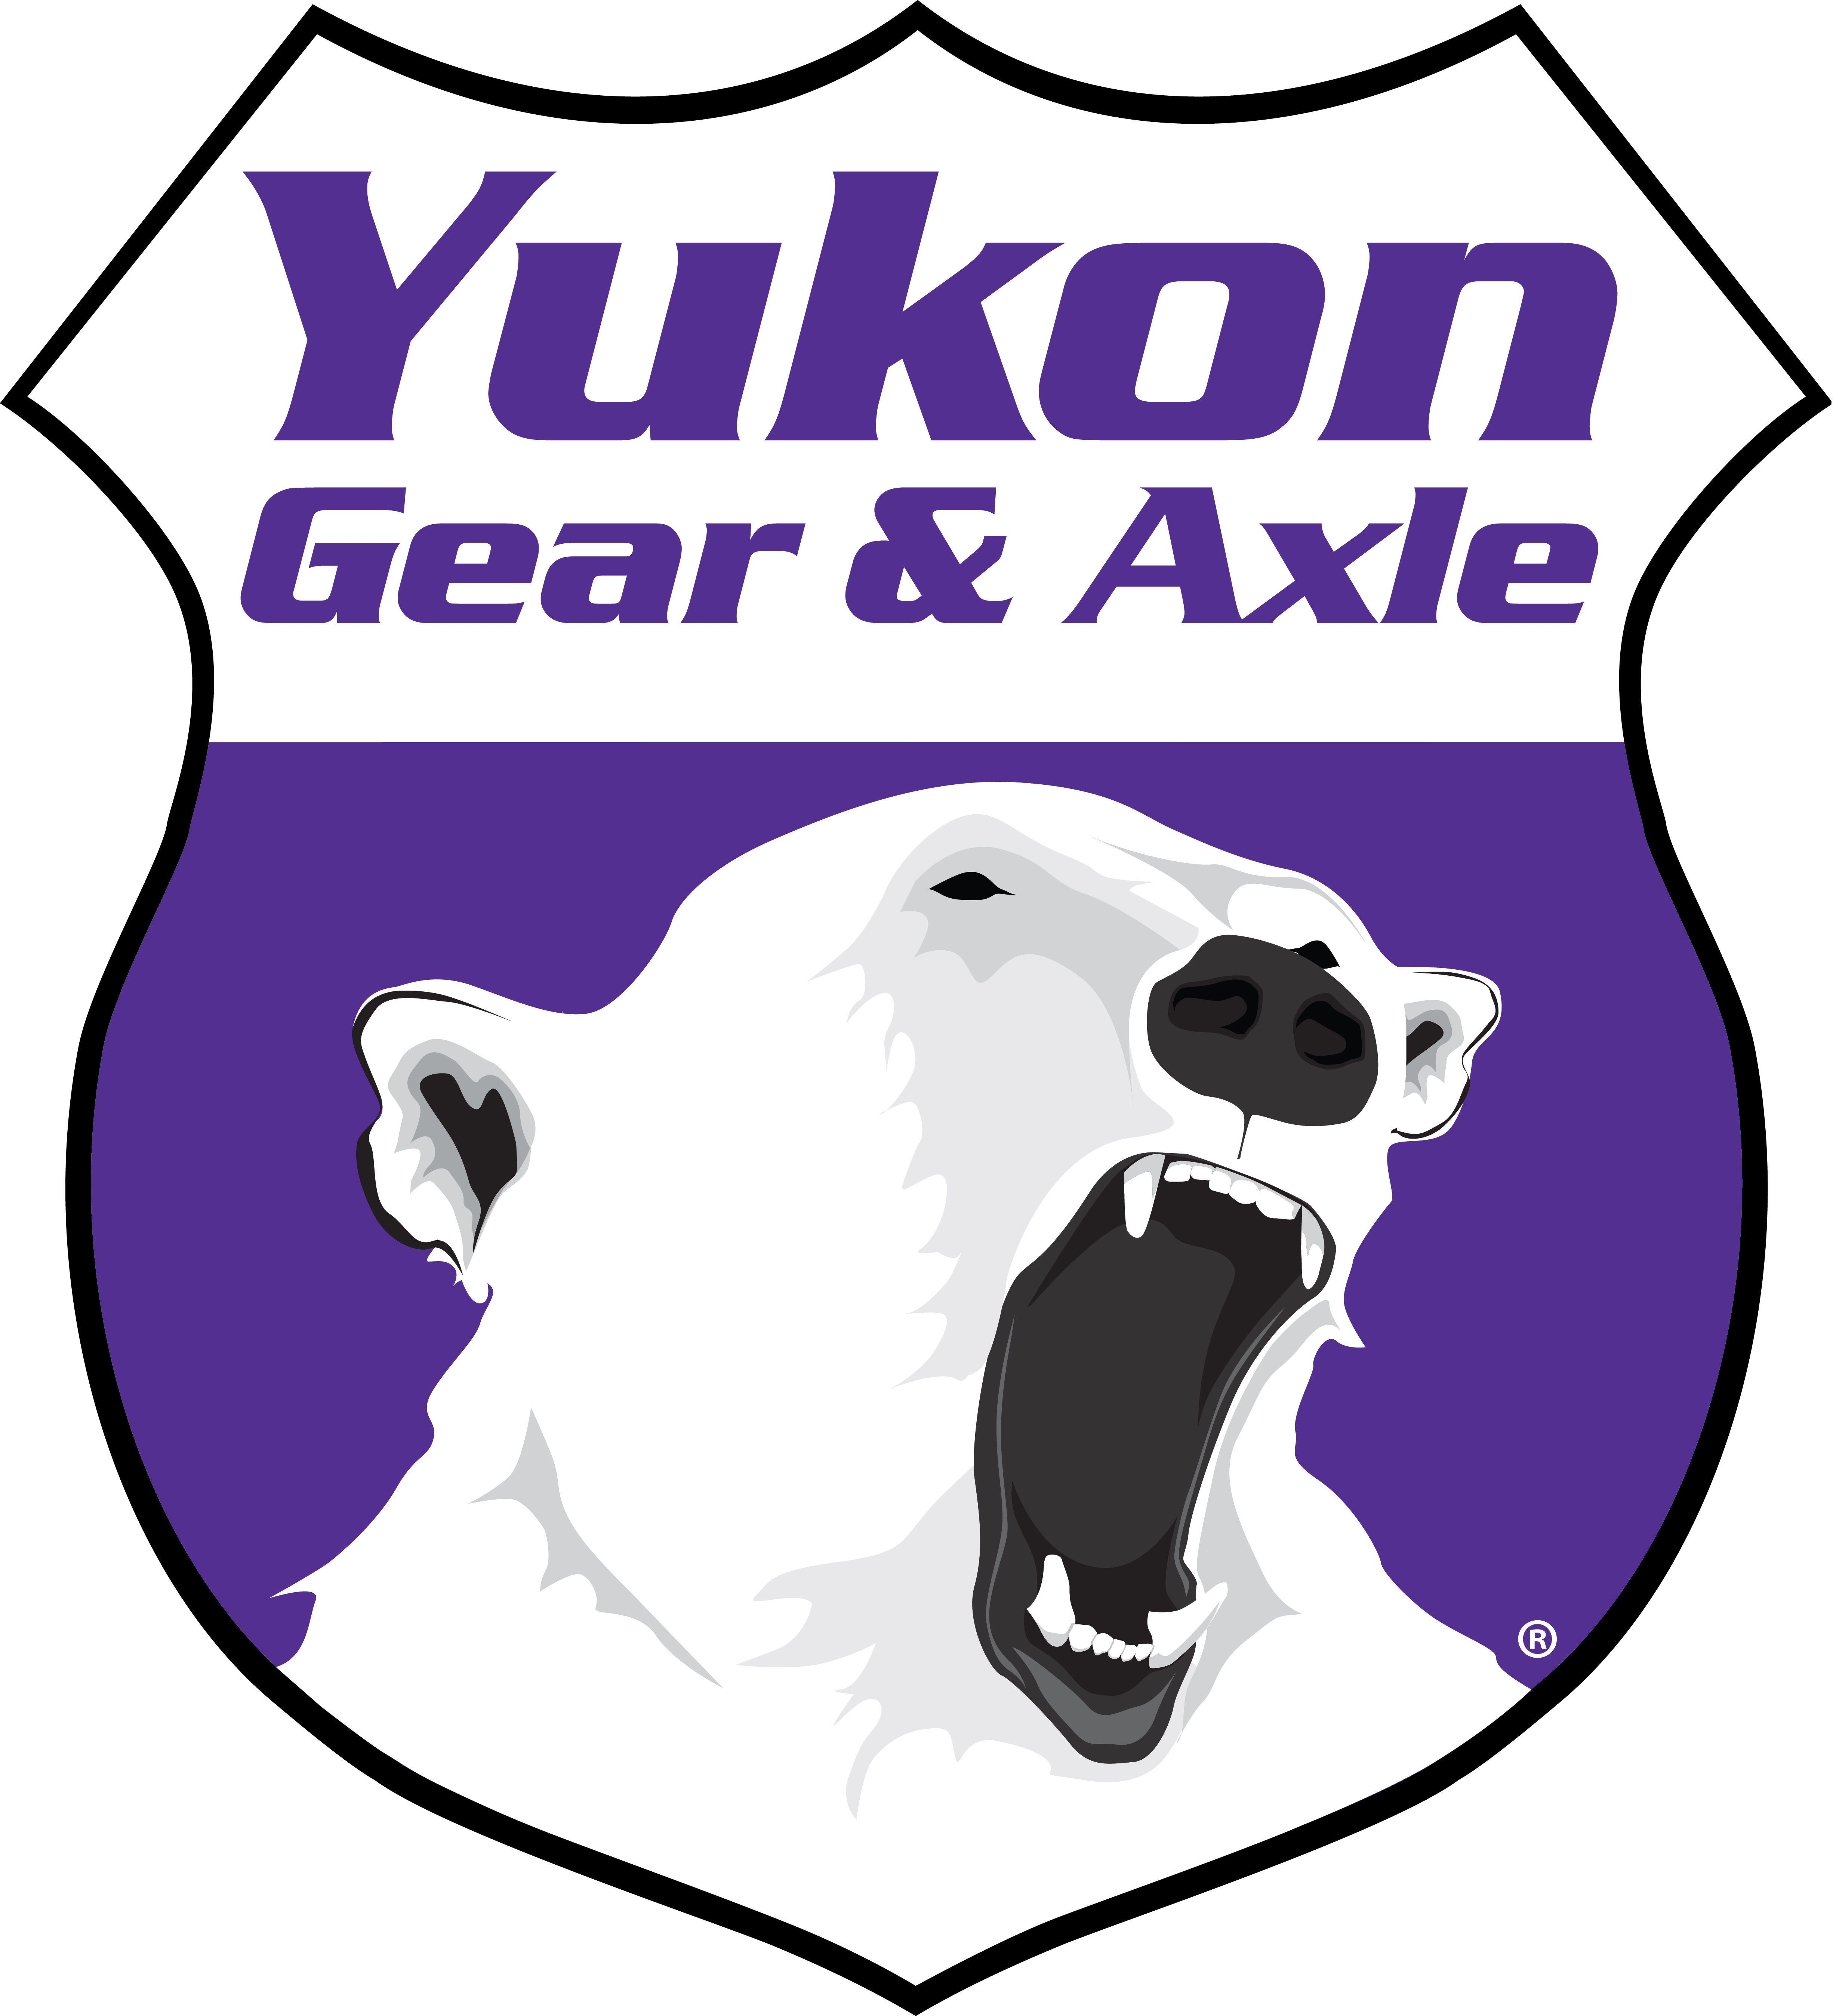 Yukon replacement yoke for Dana 44-HD, 60, and 70 with a 1310 U/Joint size 